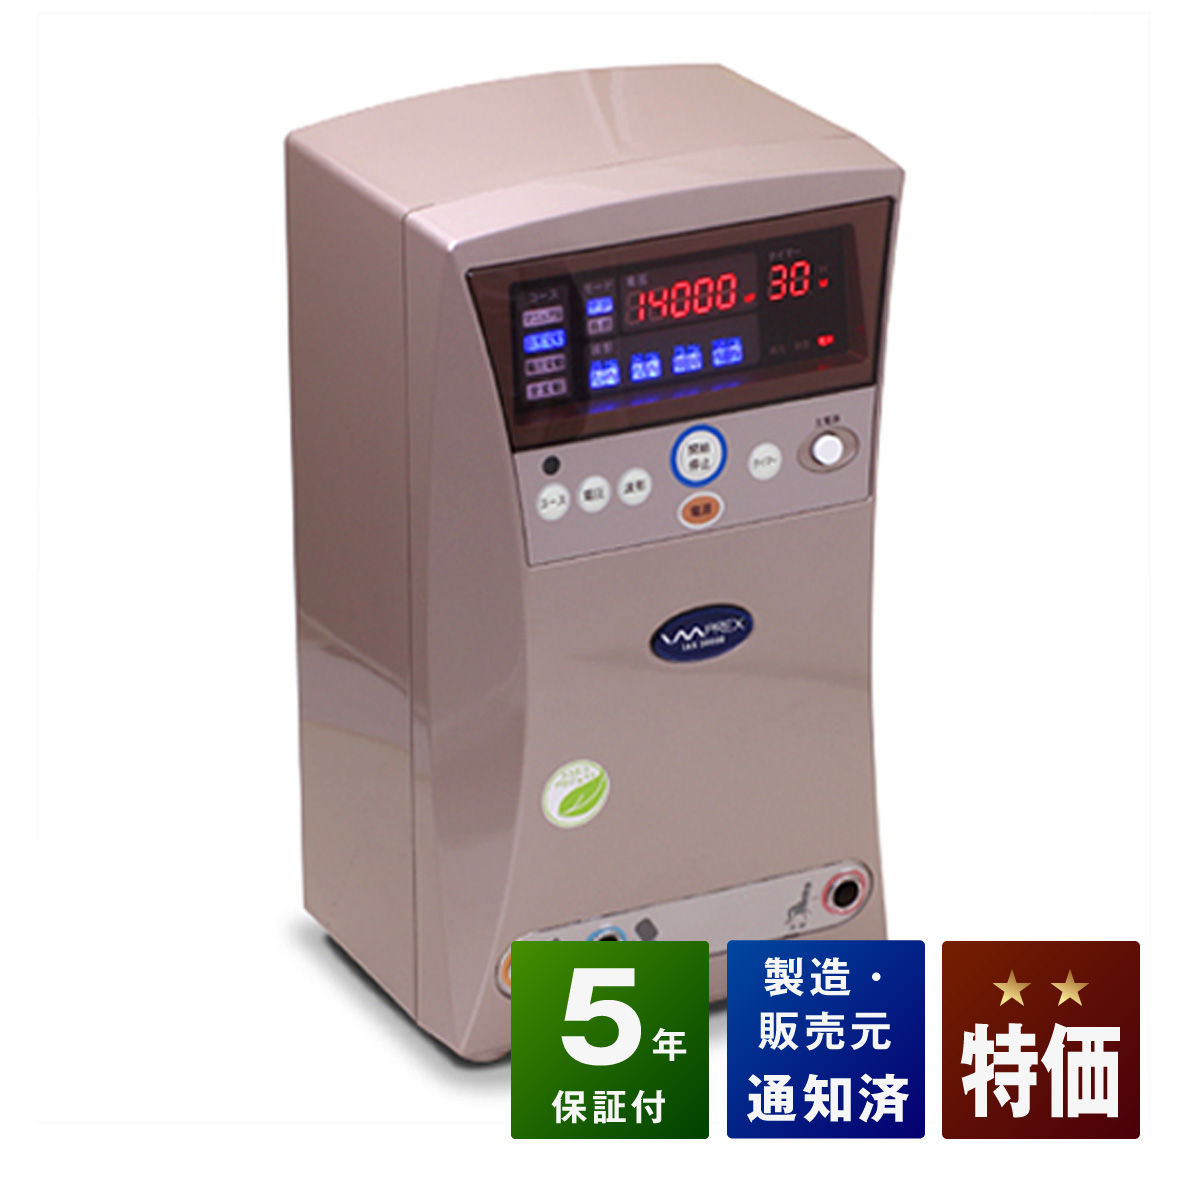  Imp Rex ias30000 (IMPREX IAS 30000 ) used special price rank 5 year guarantee a ruby jia Impression static electricity therapy apparatus 